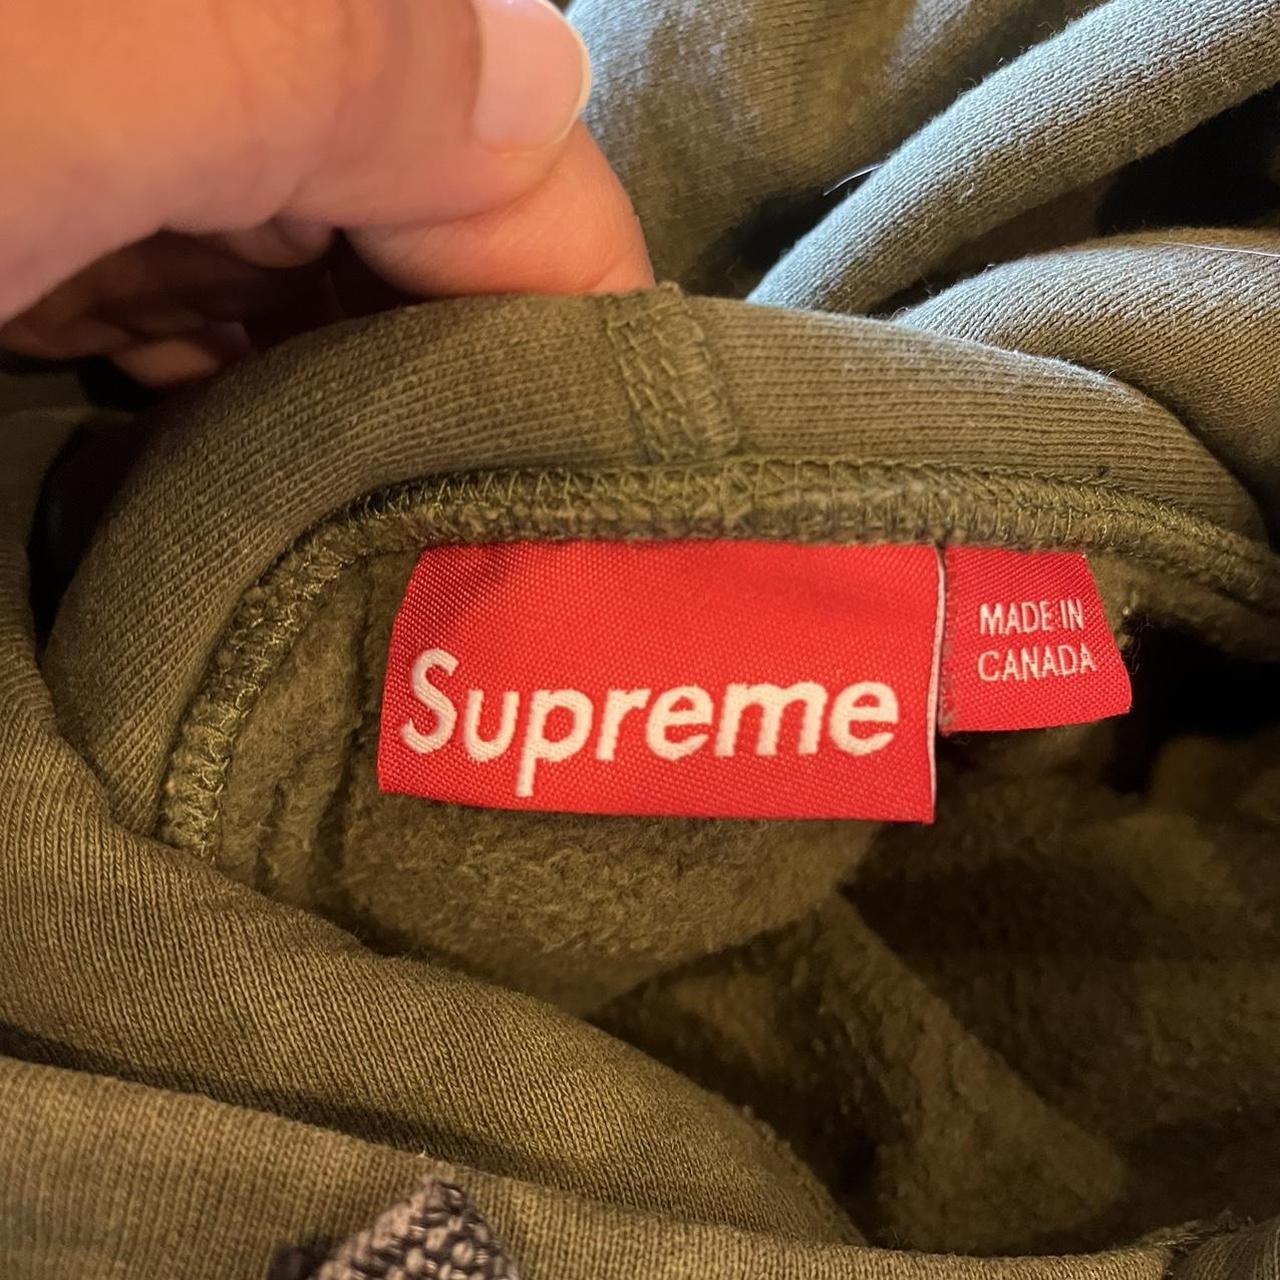 my local thrift is selling this tragic fake supreme hoodie for $120 🫠 :  r/Depop